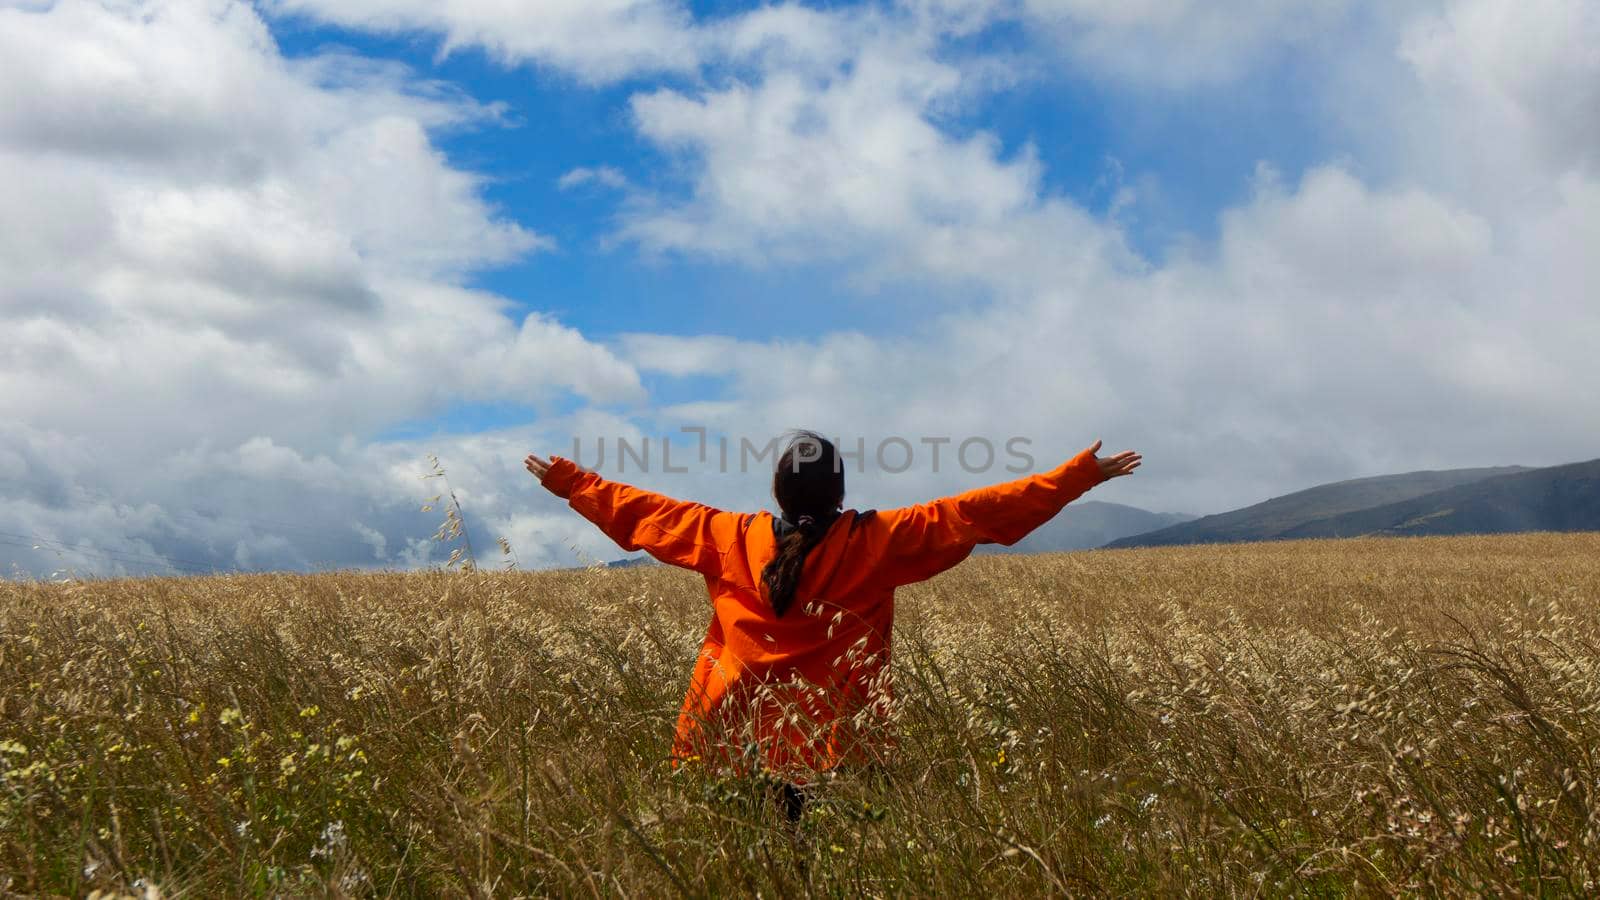 Young woman from behind in orange jacket with raised arms looking up at the sky in the middle of a wheat field on a cloudy day with blue sky and mountains in the background